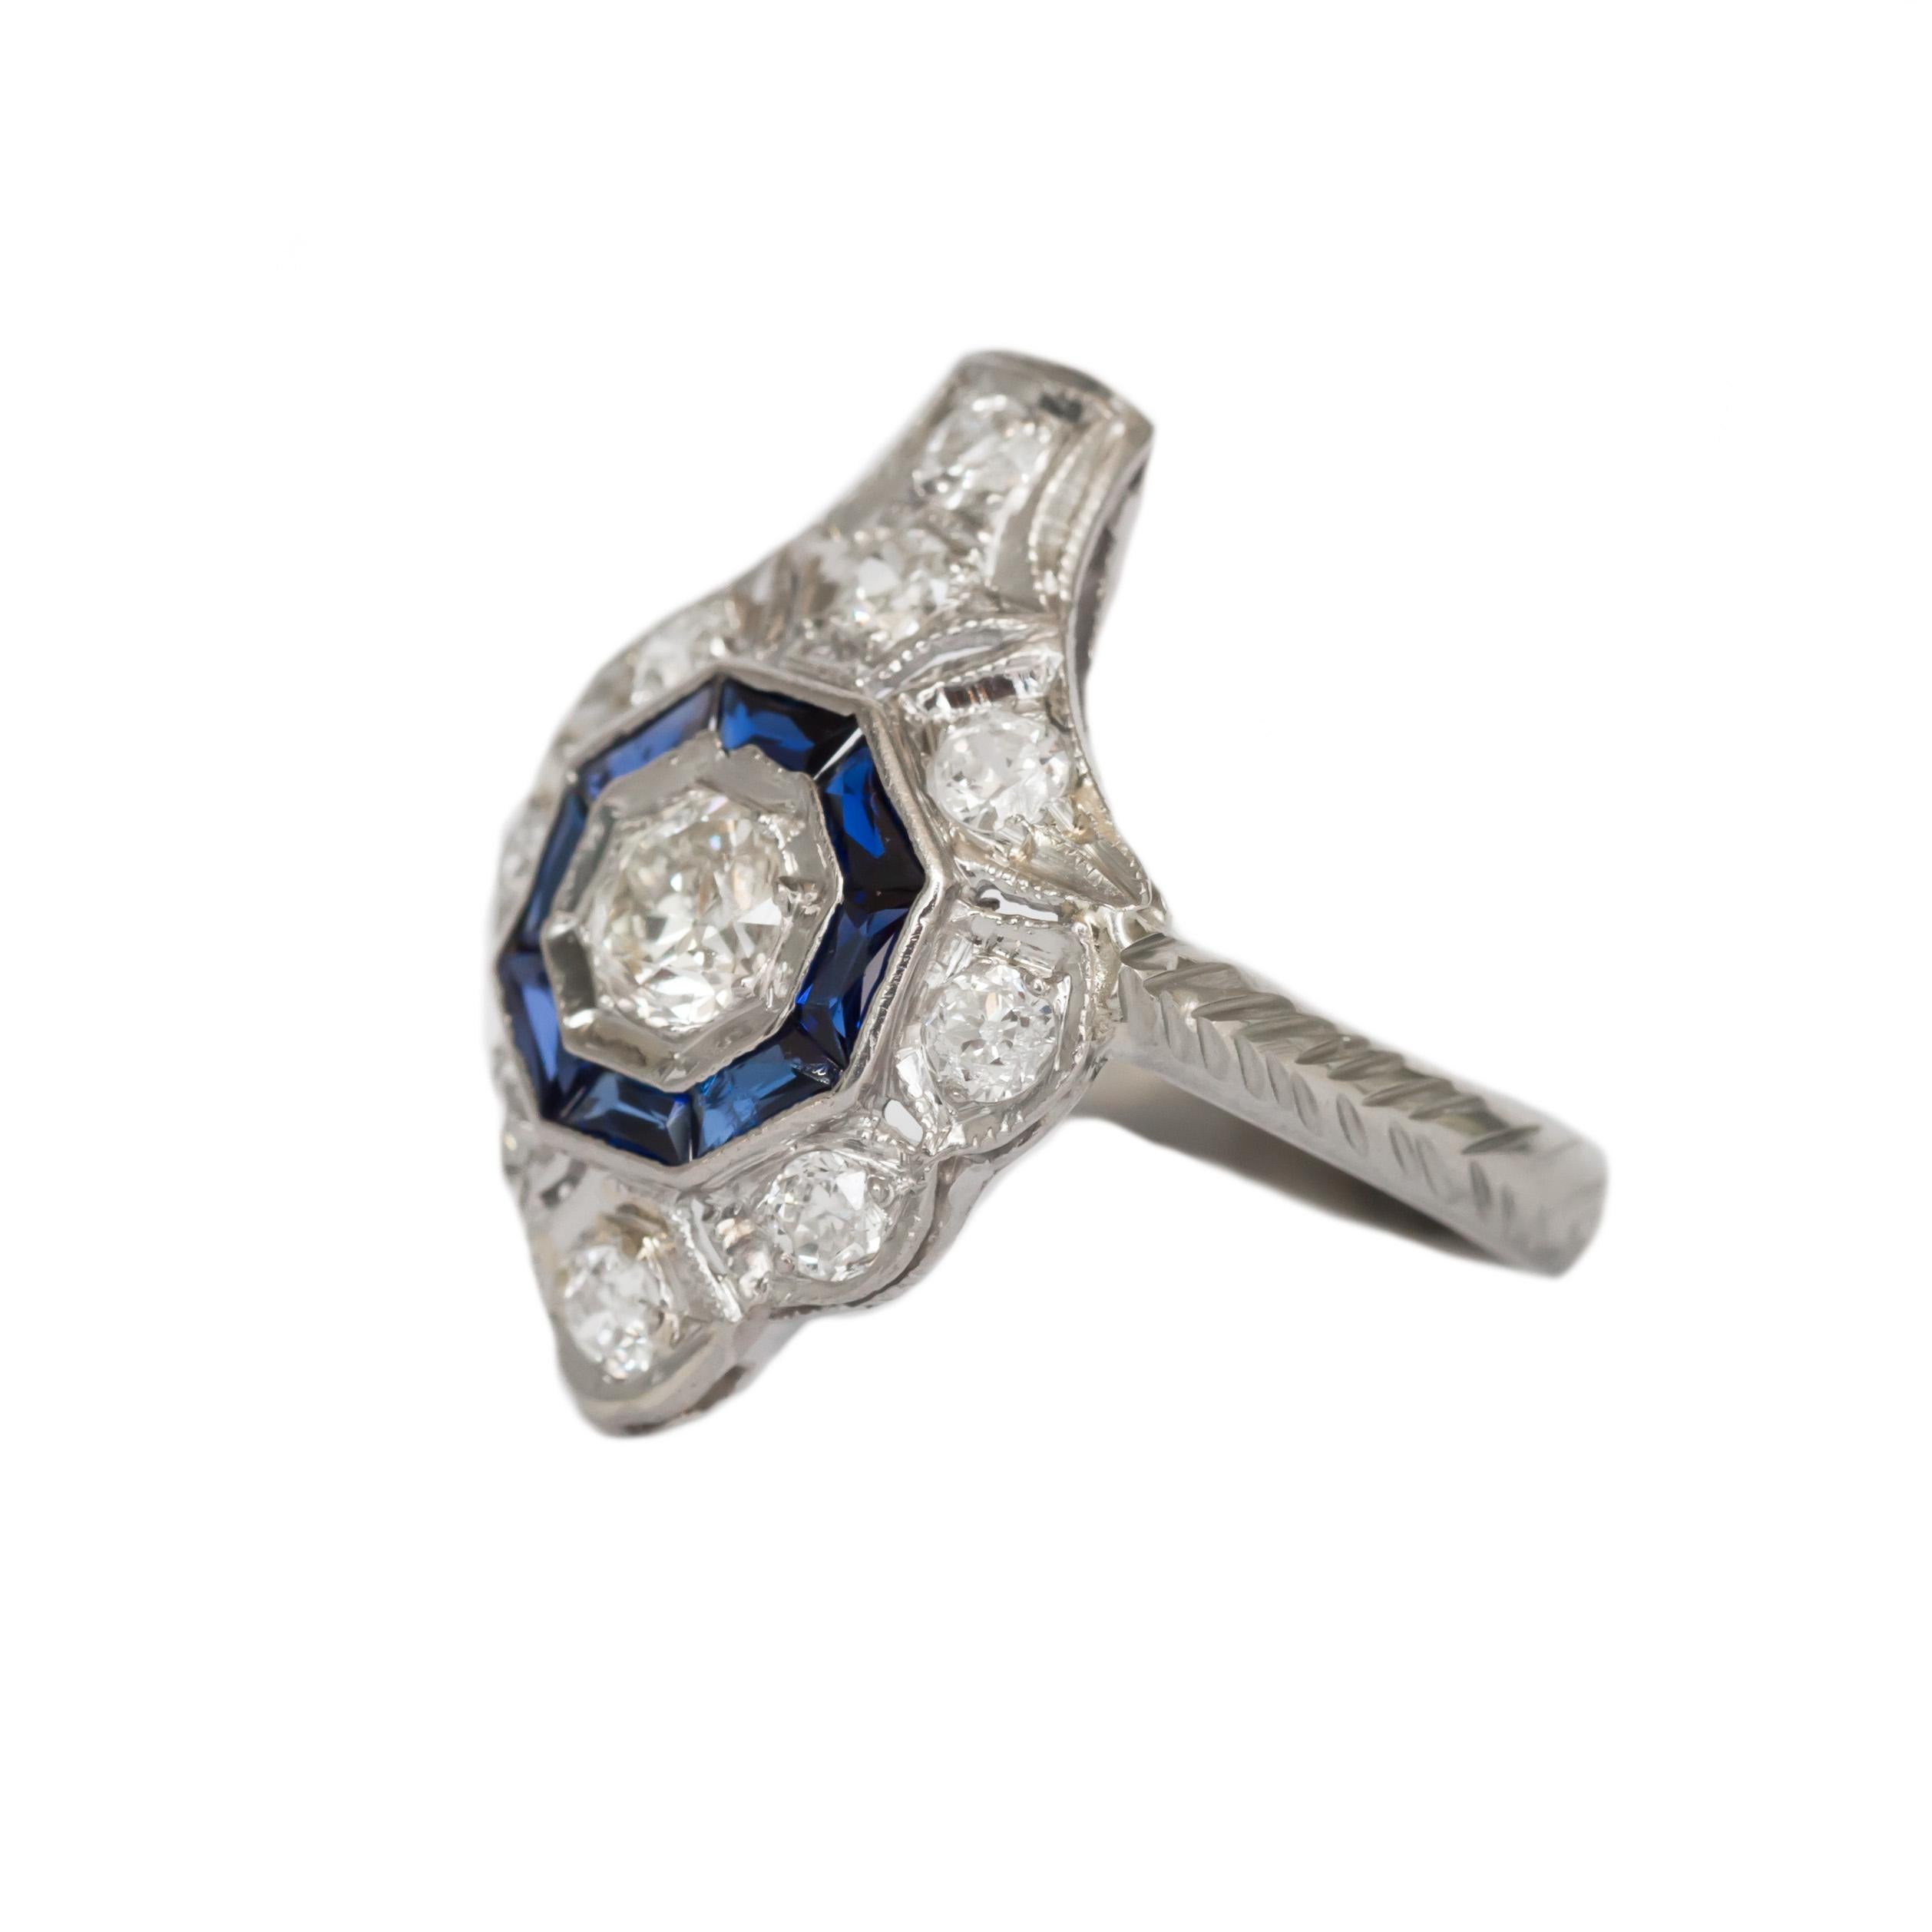 Ring Size: 4.25
Metal Type: Platinum & 14 karat White Gold 
Weight: 3.5 grams

Center Diamond Details
Shape: Old European Brilliant 
Carat Weight: .25 carat, total weight
Color: F
Clarity: VS

Side Stone Details: 
Type: Synthetic Sapphire 
Shape: